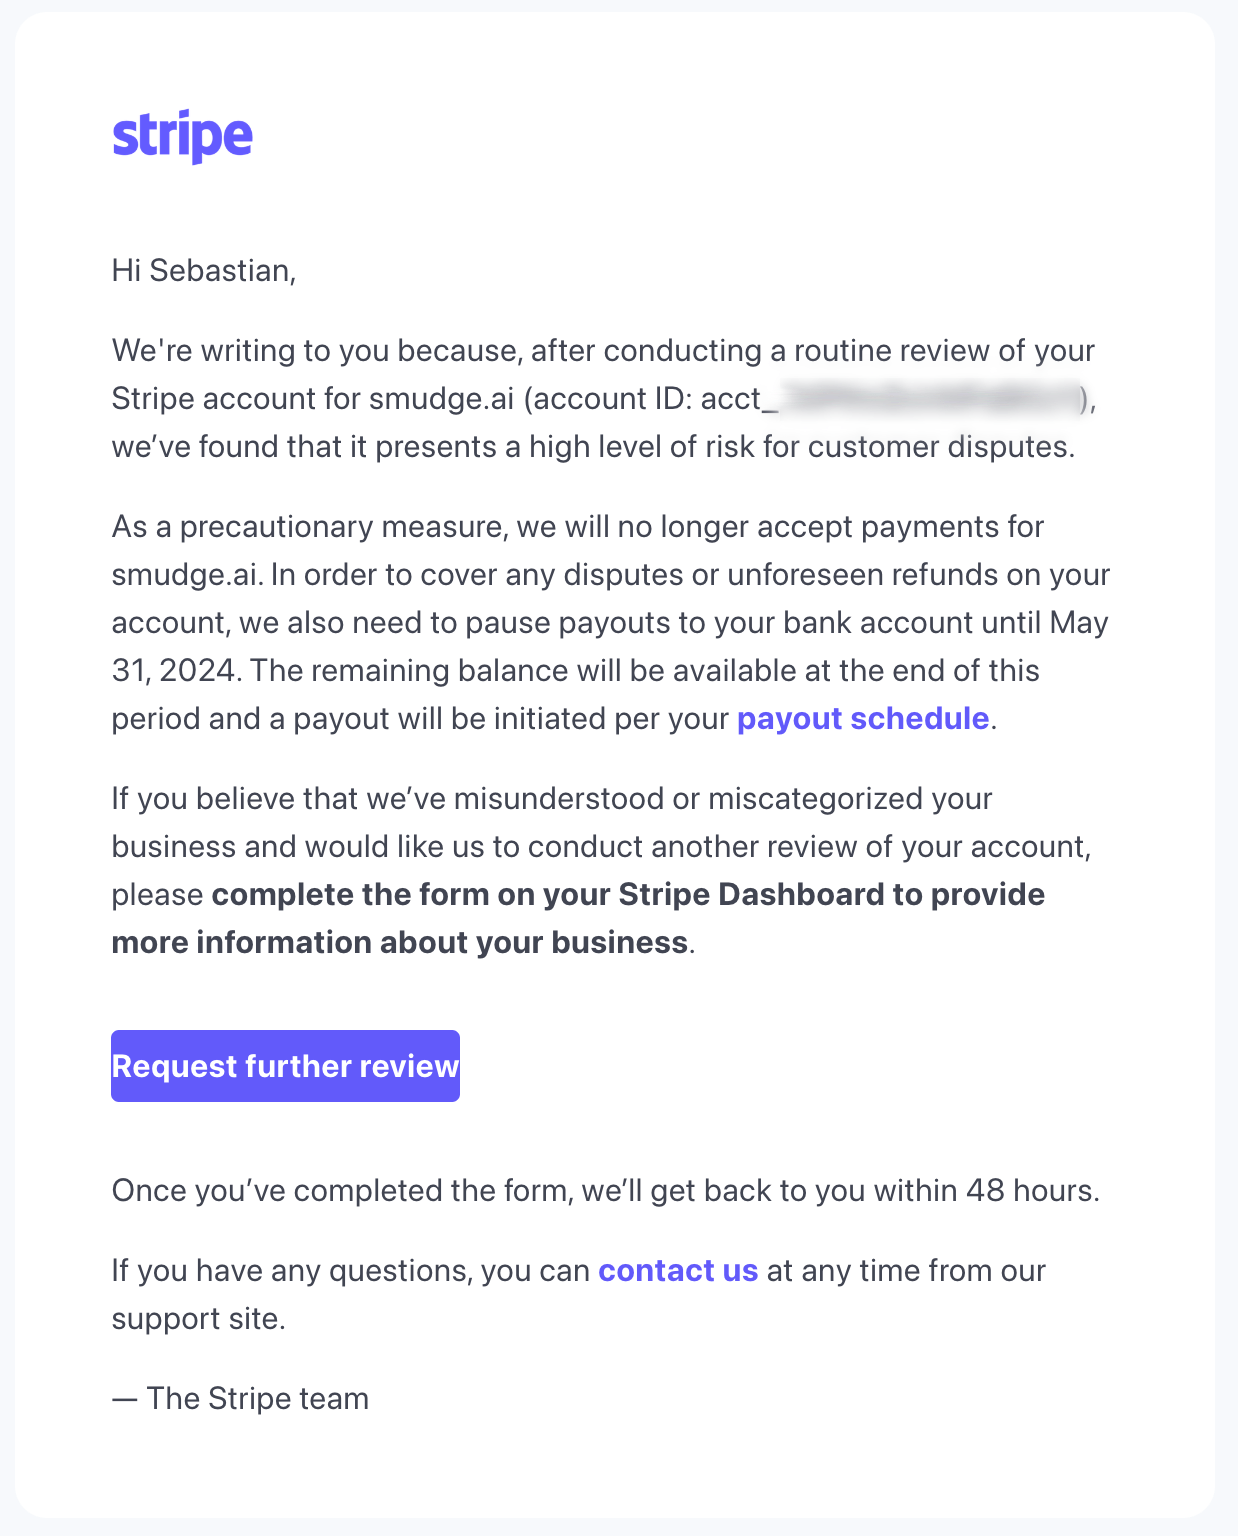 Screenshot of an email from Stripe, writing to let us know our account has been closed due to a high risk of customer disputes